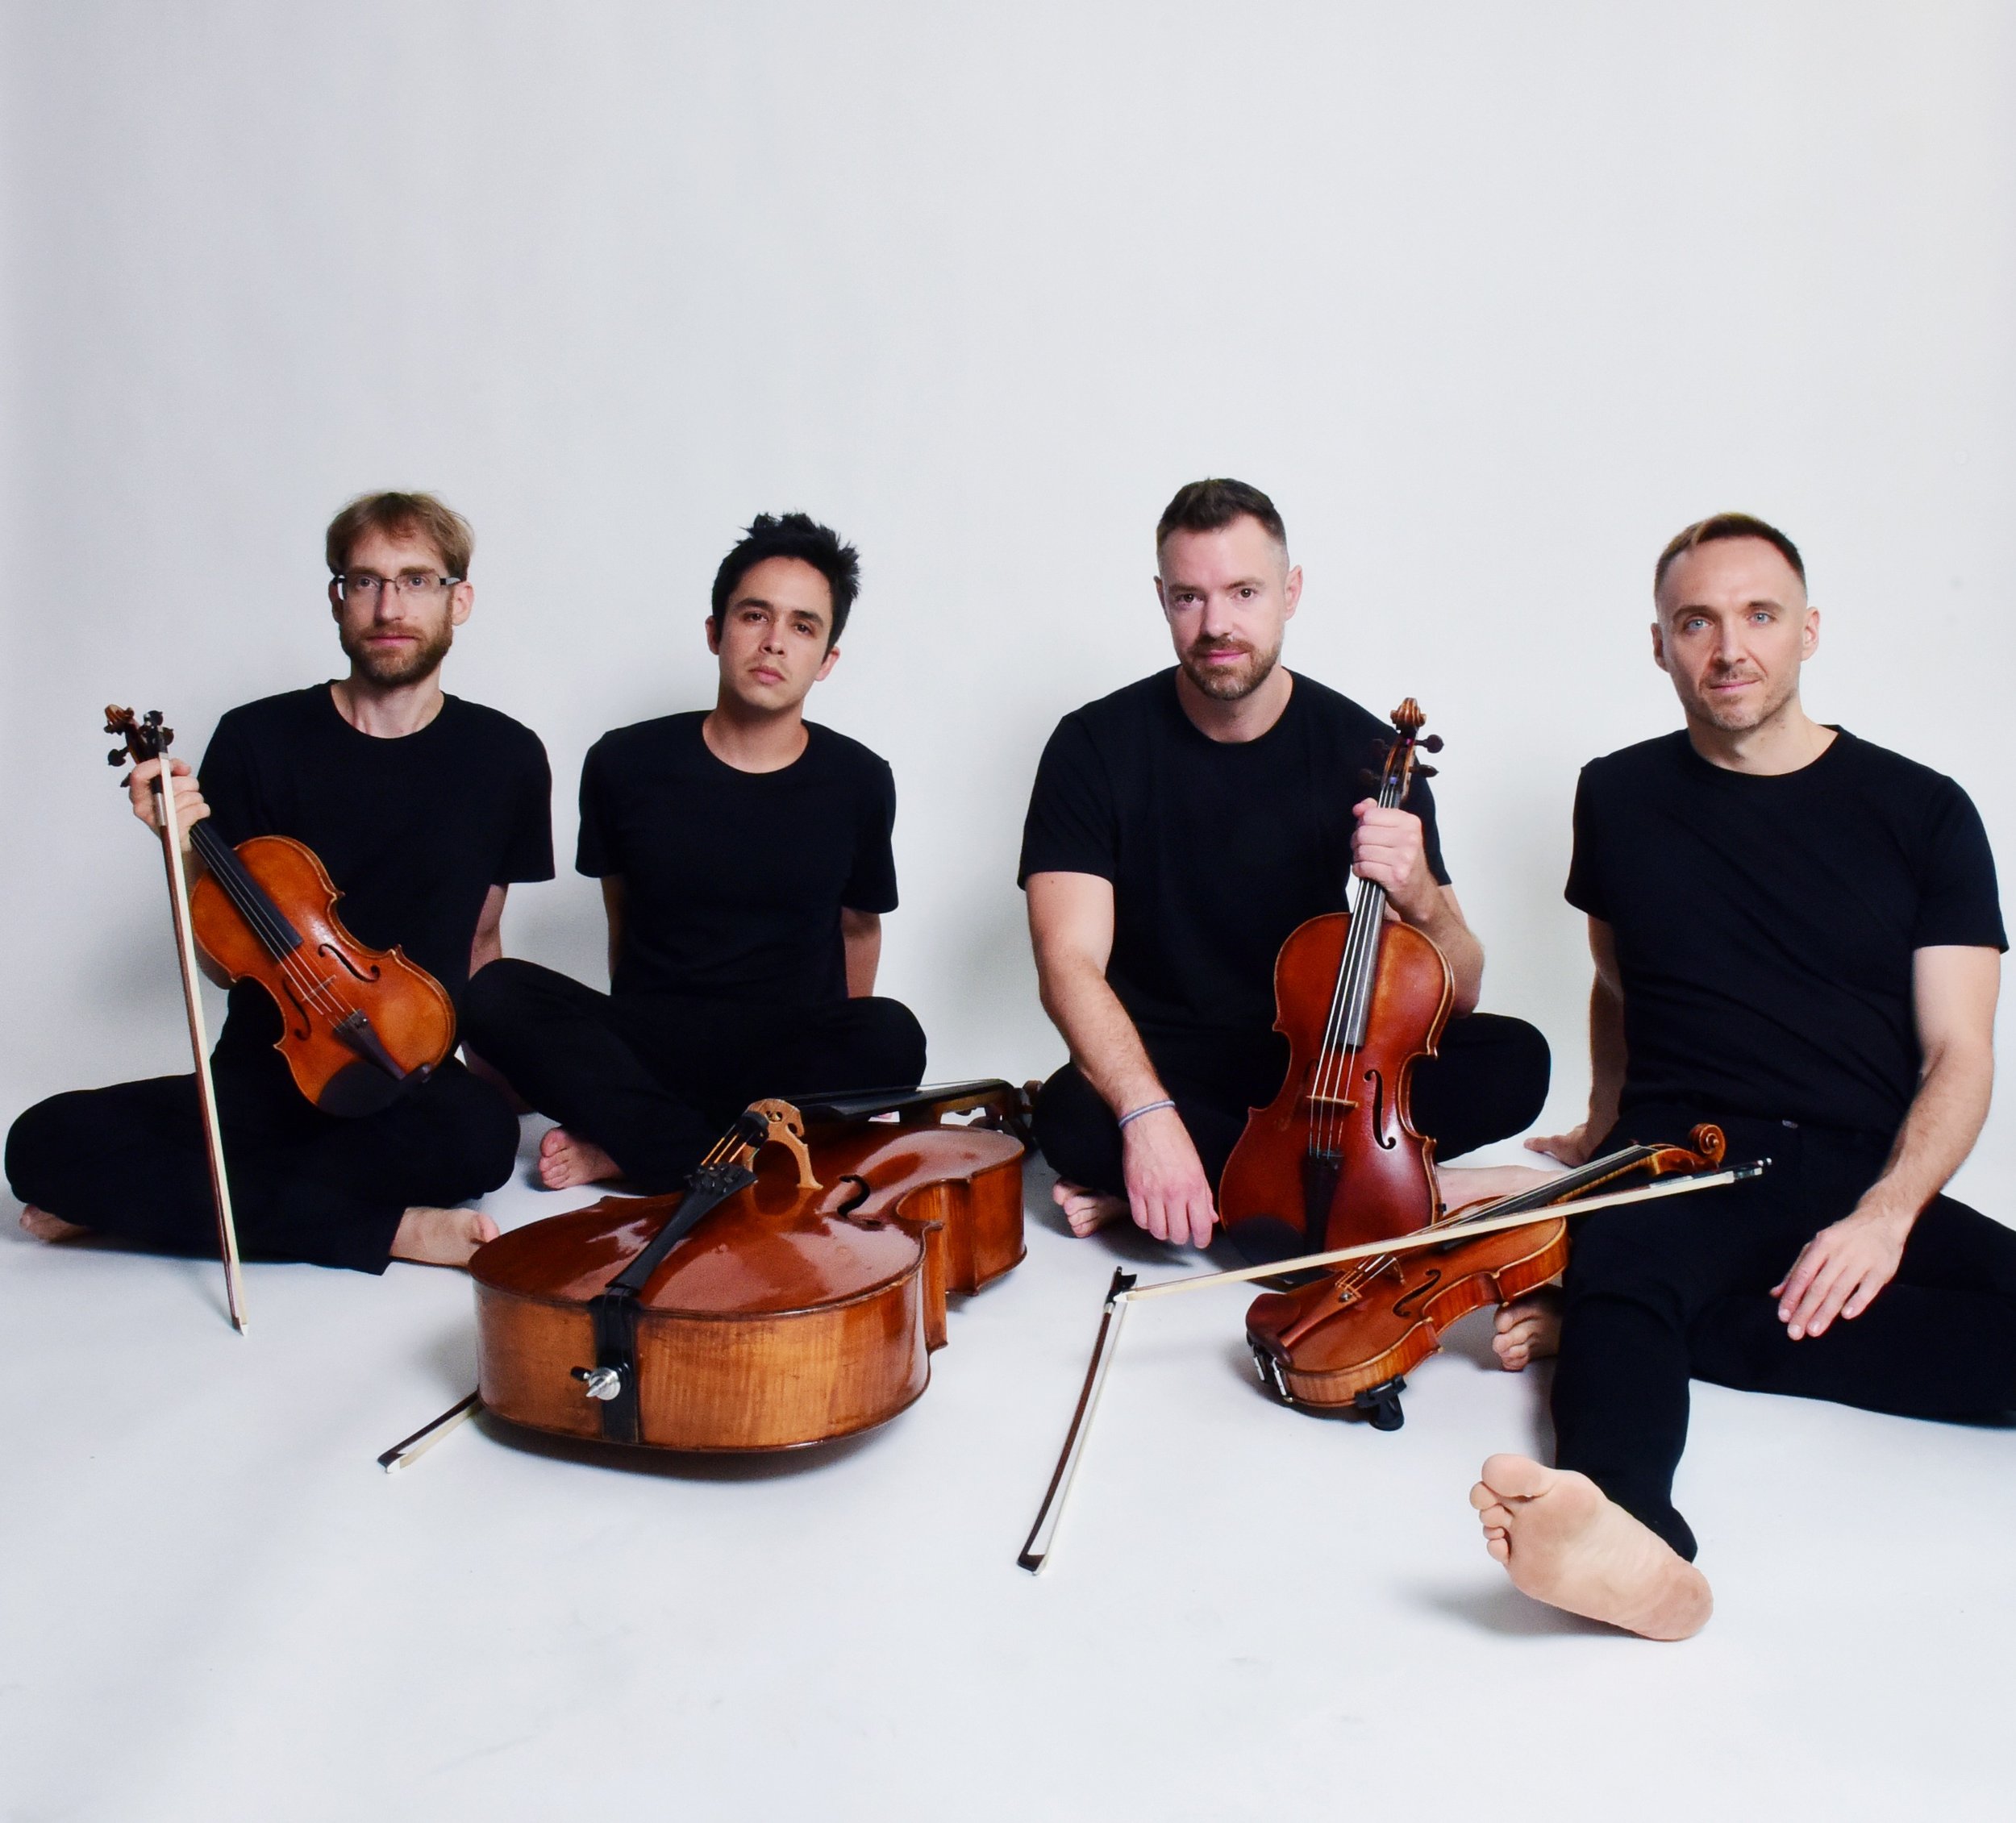 A group of string musicians sitting near a white background